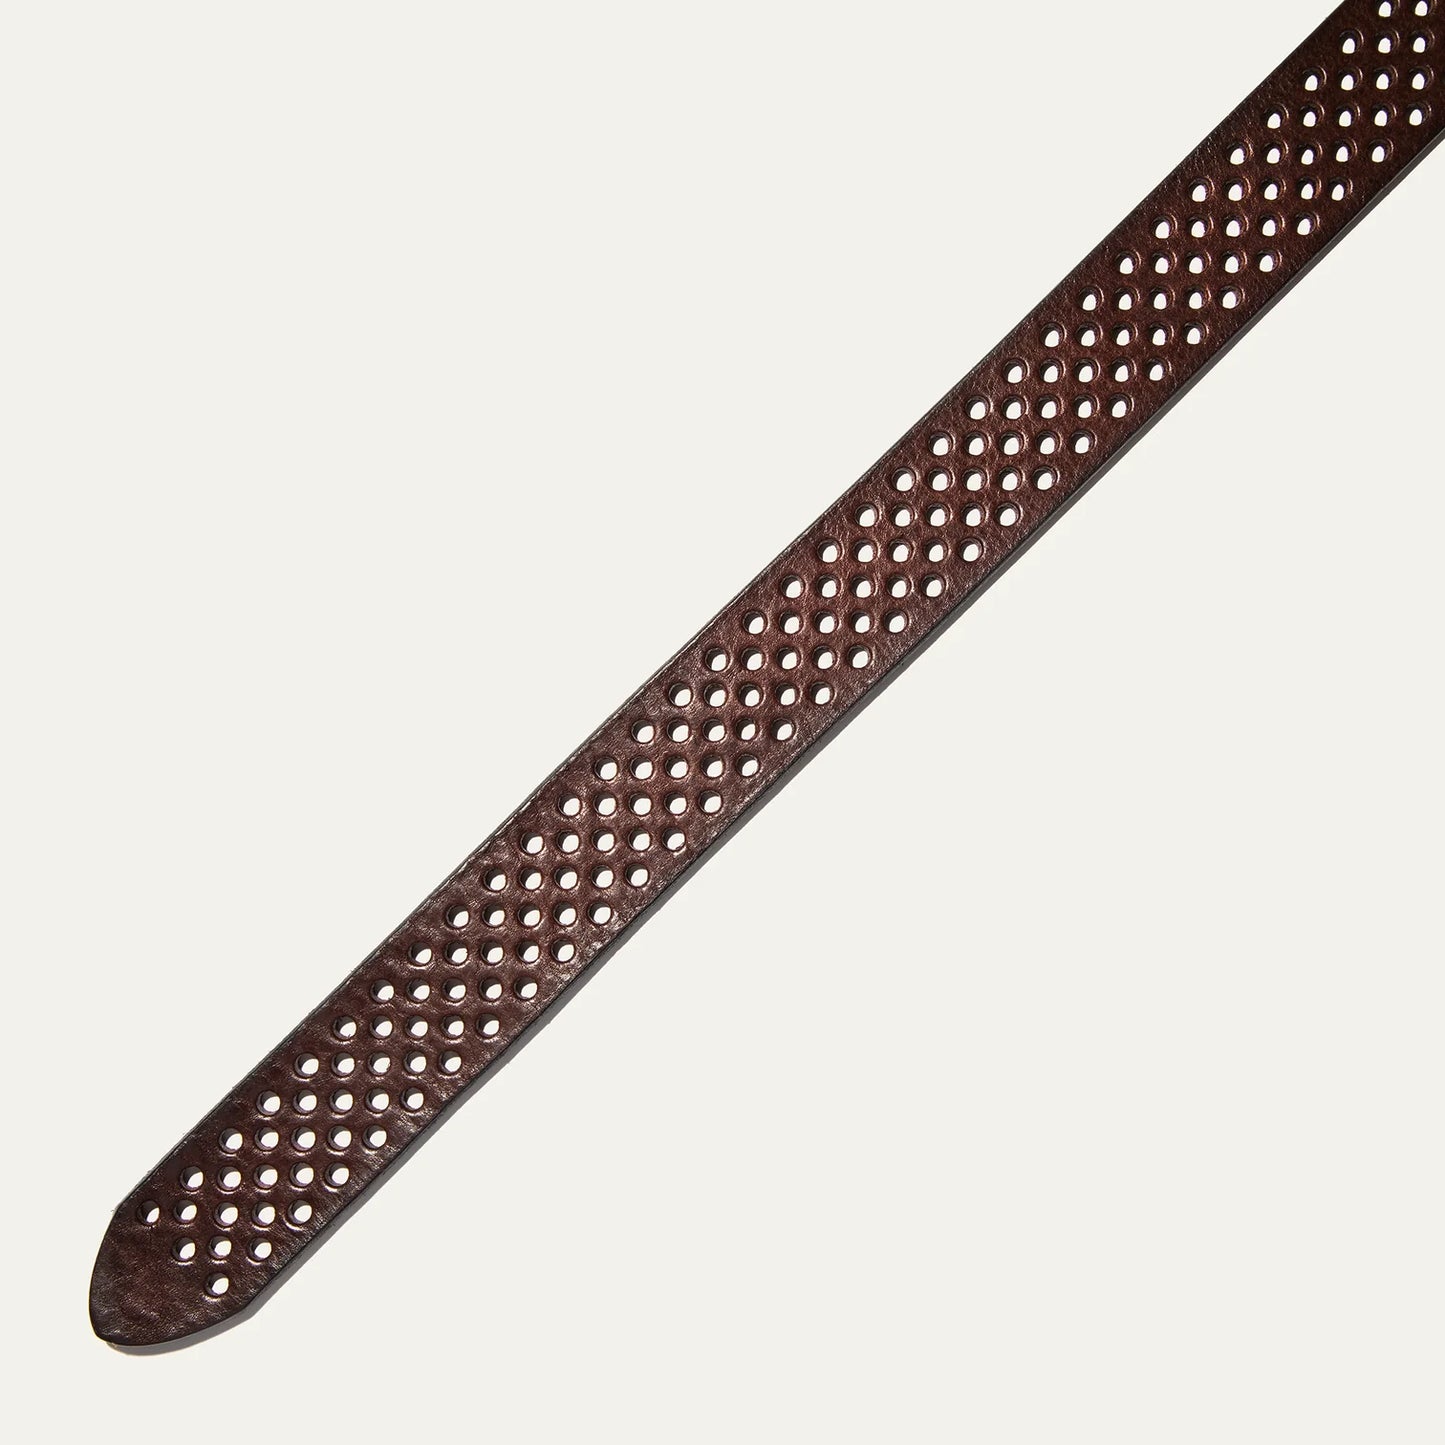 Will Leather Goods Perforated Jean Belt - Brown